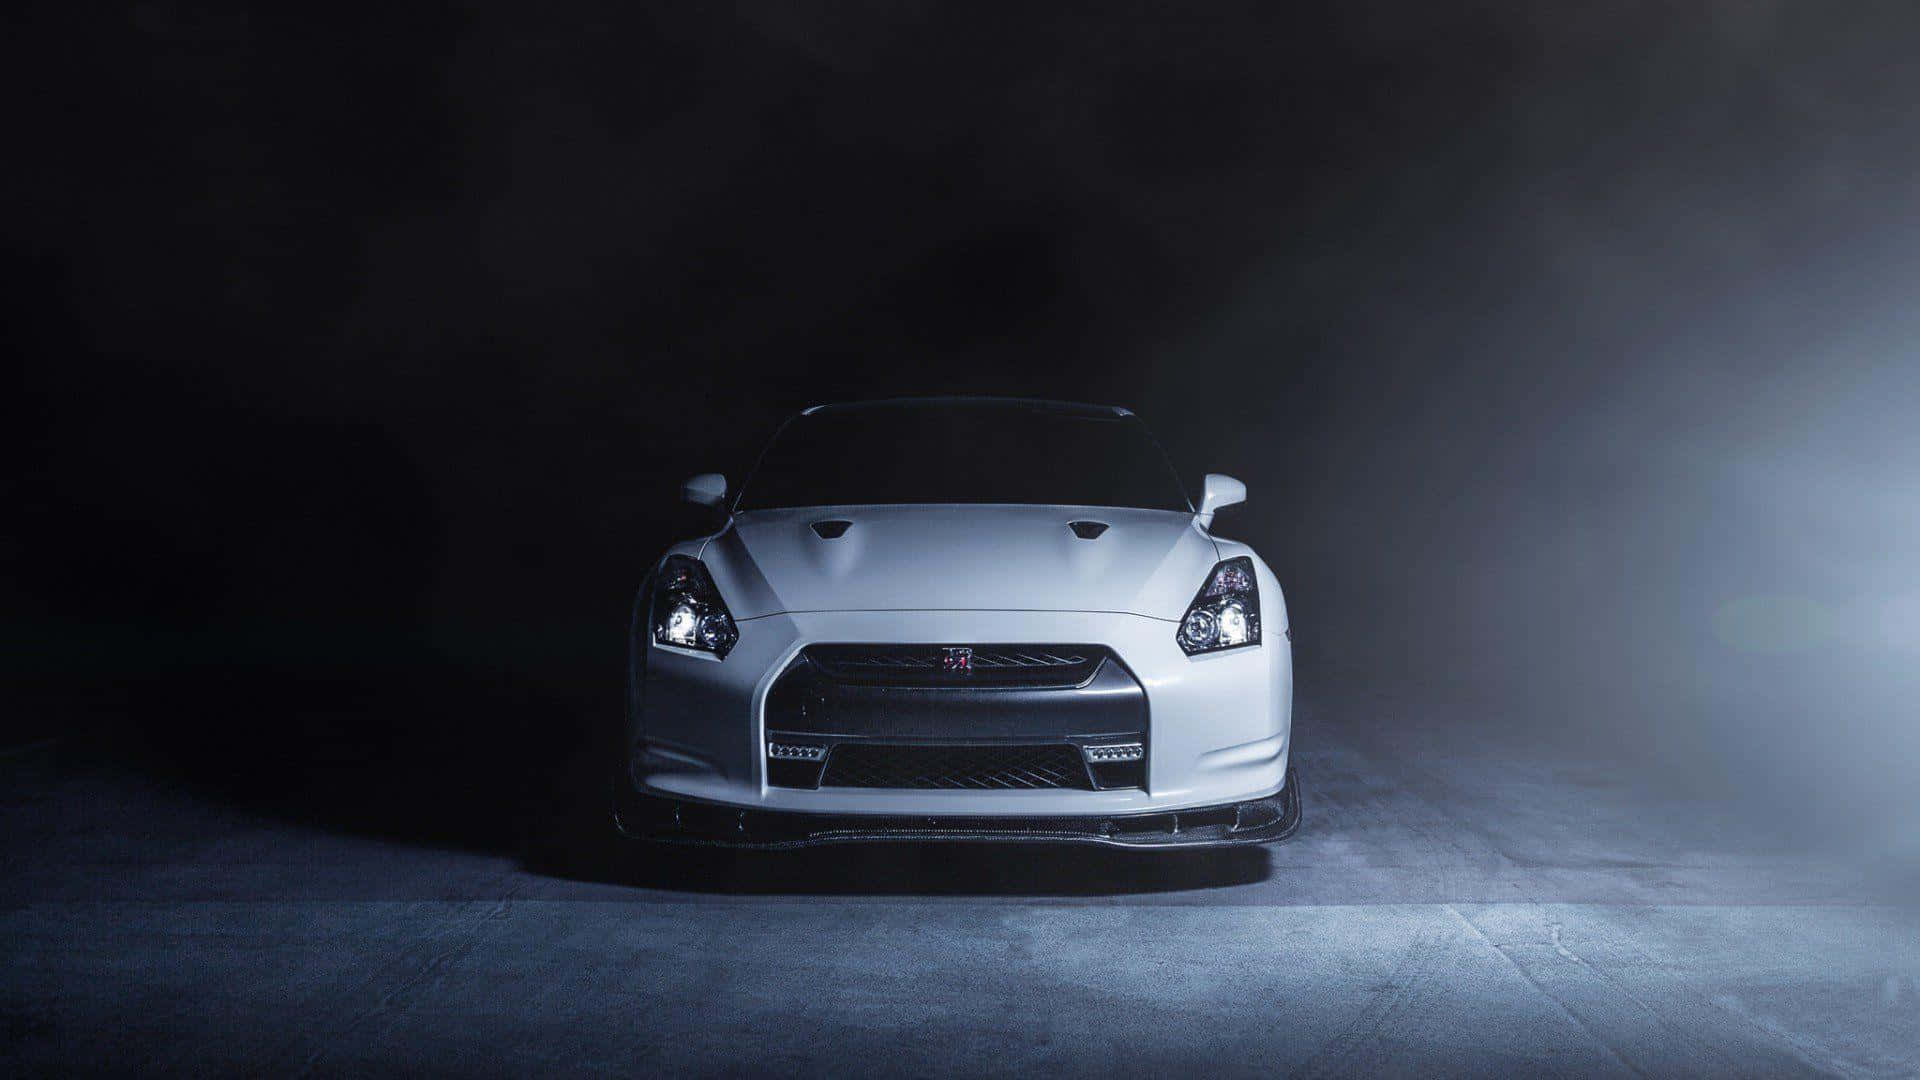 Get The Thrill Of A Lifetime Behind The Wheel In A Nissan Gtr. Wallpaper